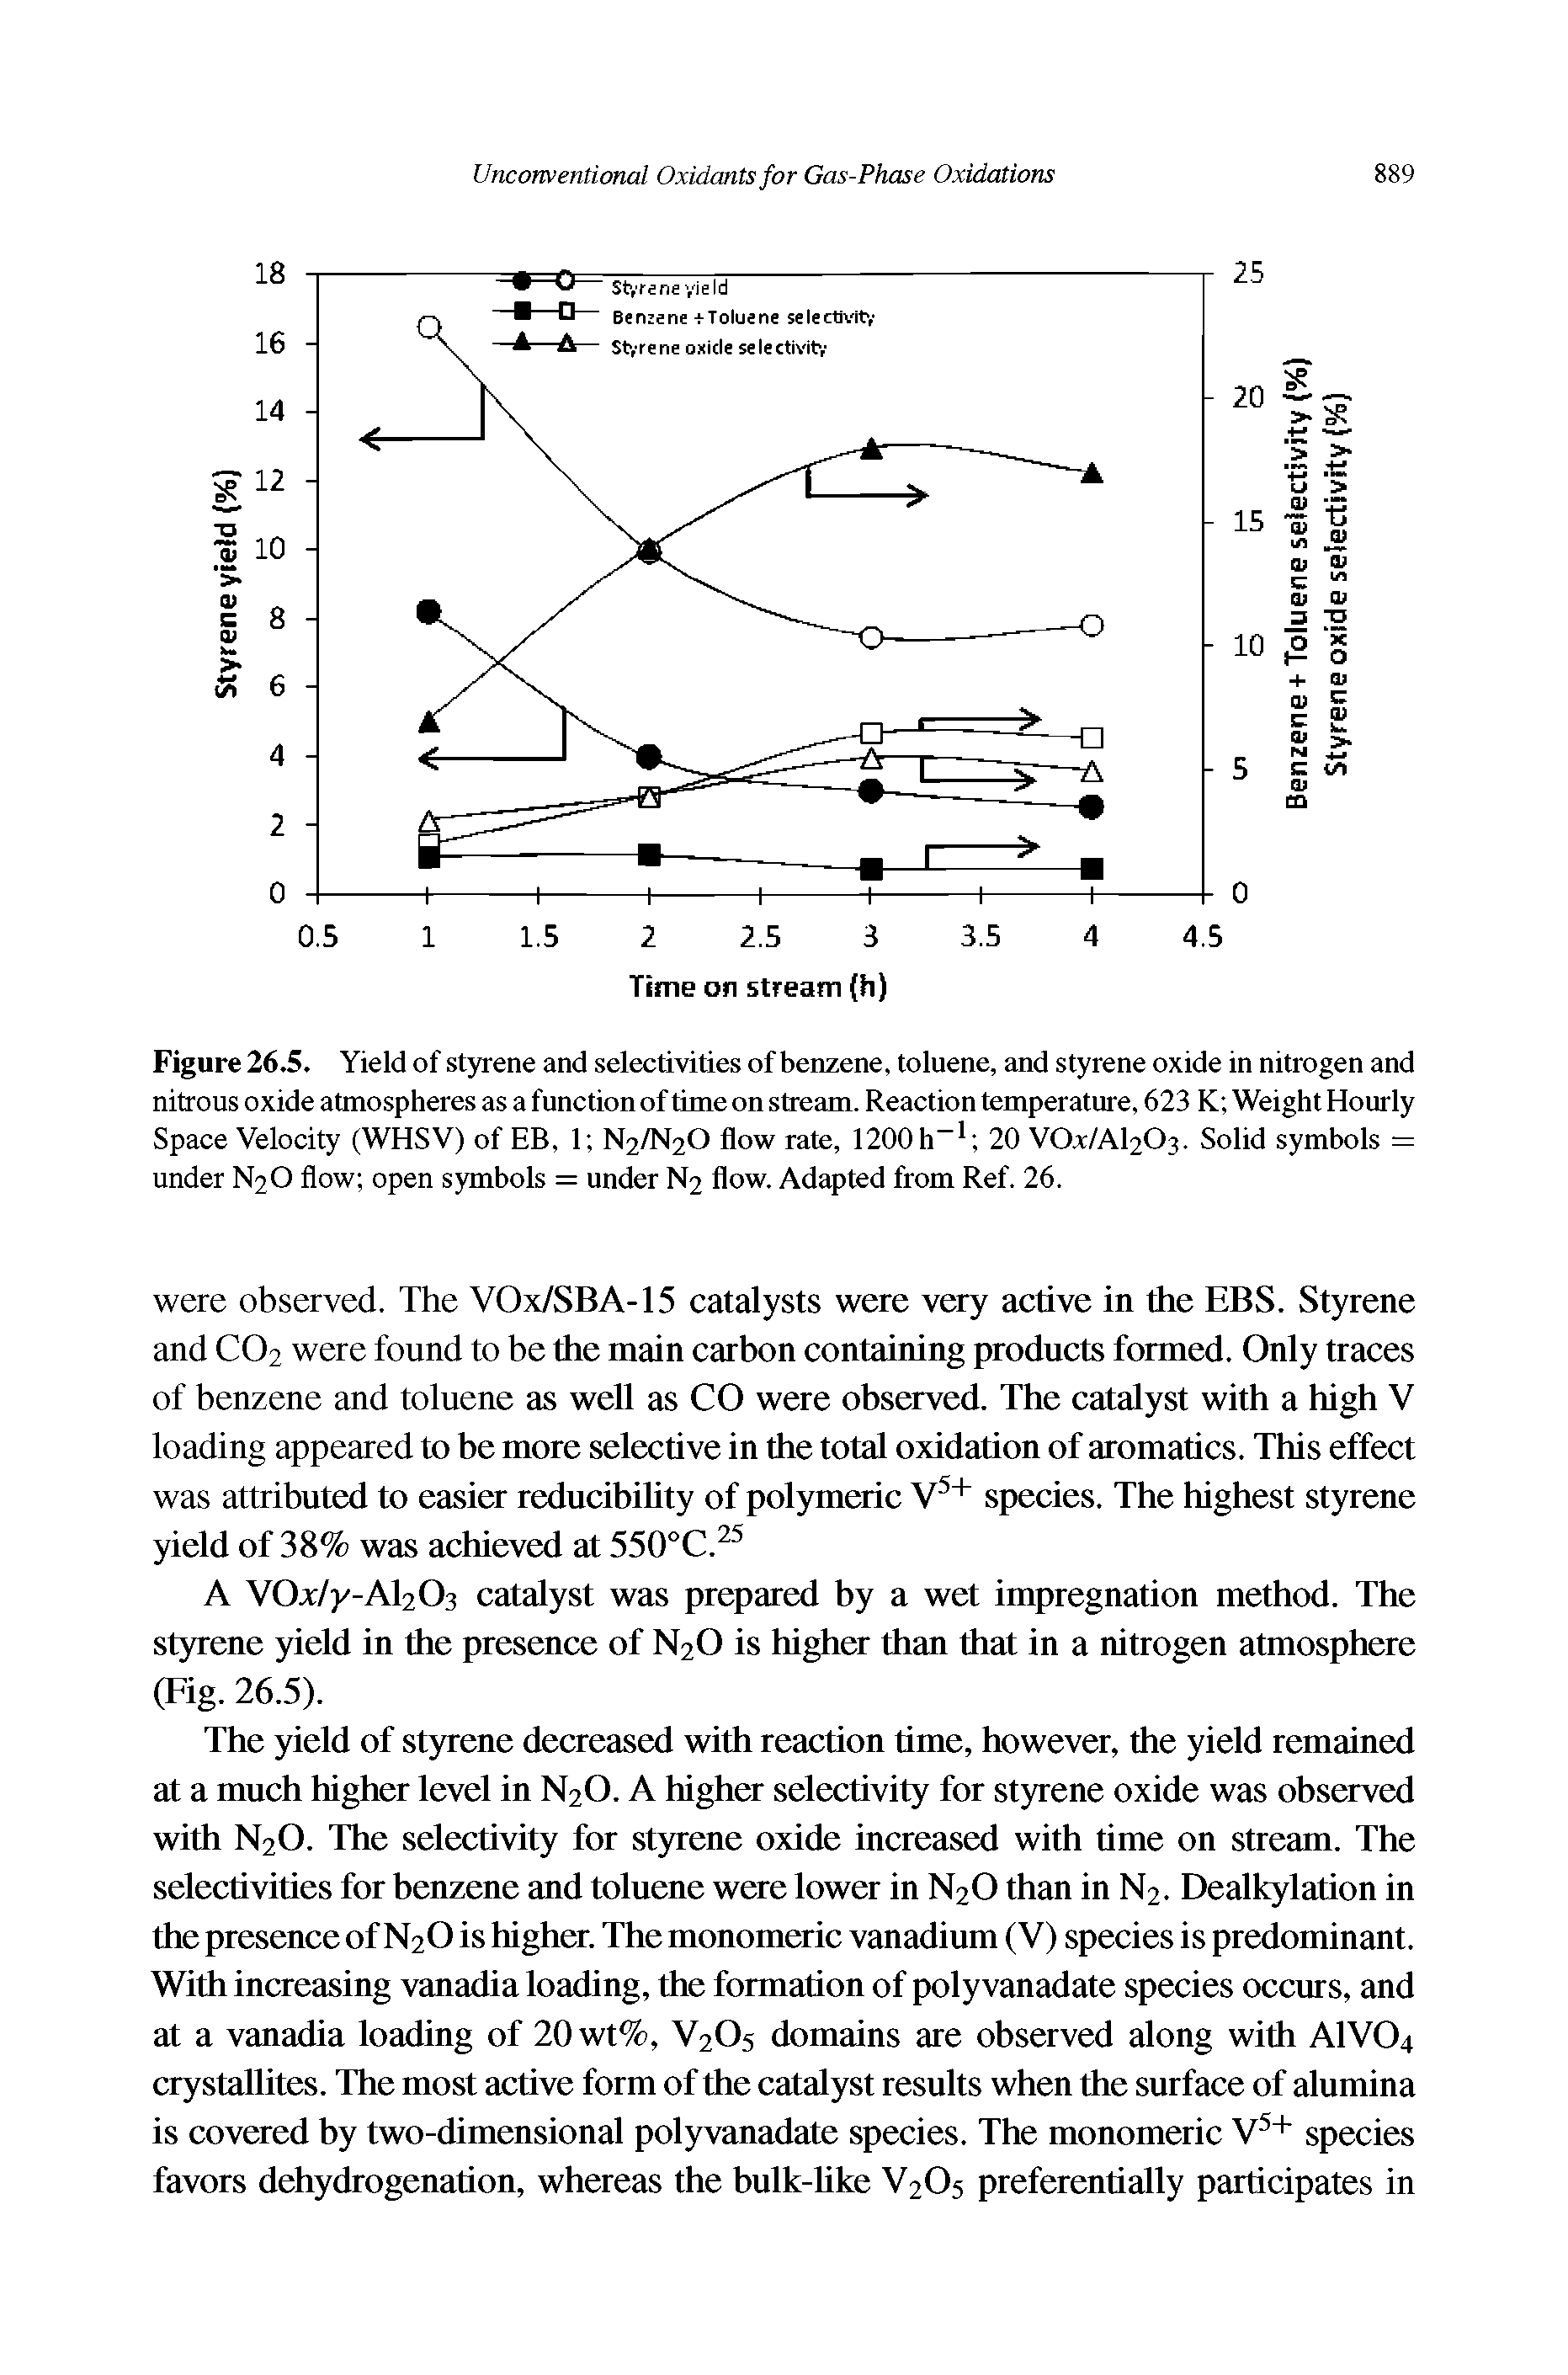 Figure 26.5. Yield of styrene and selectivities of benzene, toluene, and styrene oxide in nitrogen and nitrous oxide atmospheres as a function of time on stream. Reaction temperature, 623 K Weight Hourly Space Velocity (WHSV) of EB, 1 N2/N2O flow rate, 1200h 20 VOX/AI2O3. Solid symbols = under N2O flow open symbols = under N2 flow. Adapted from Ref. 26.